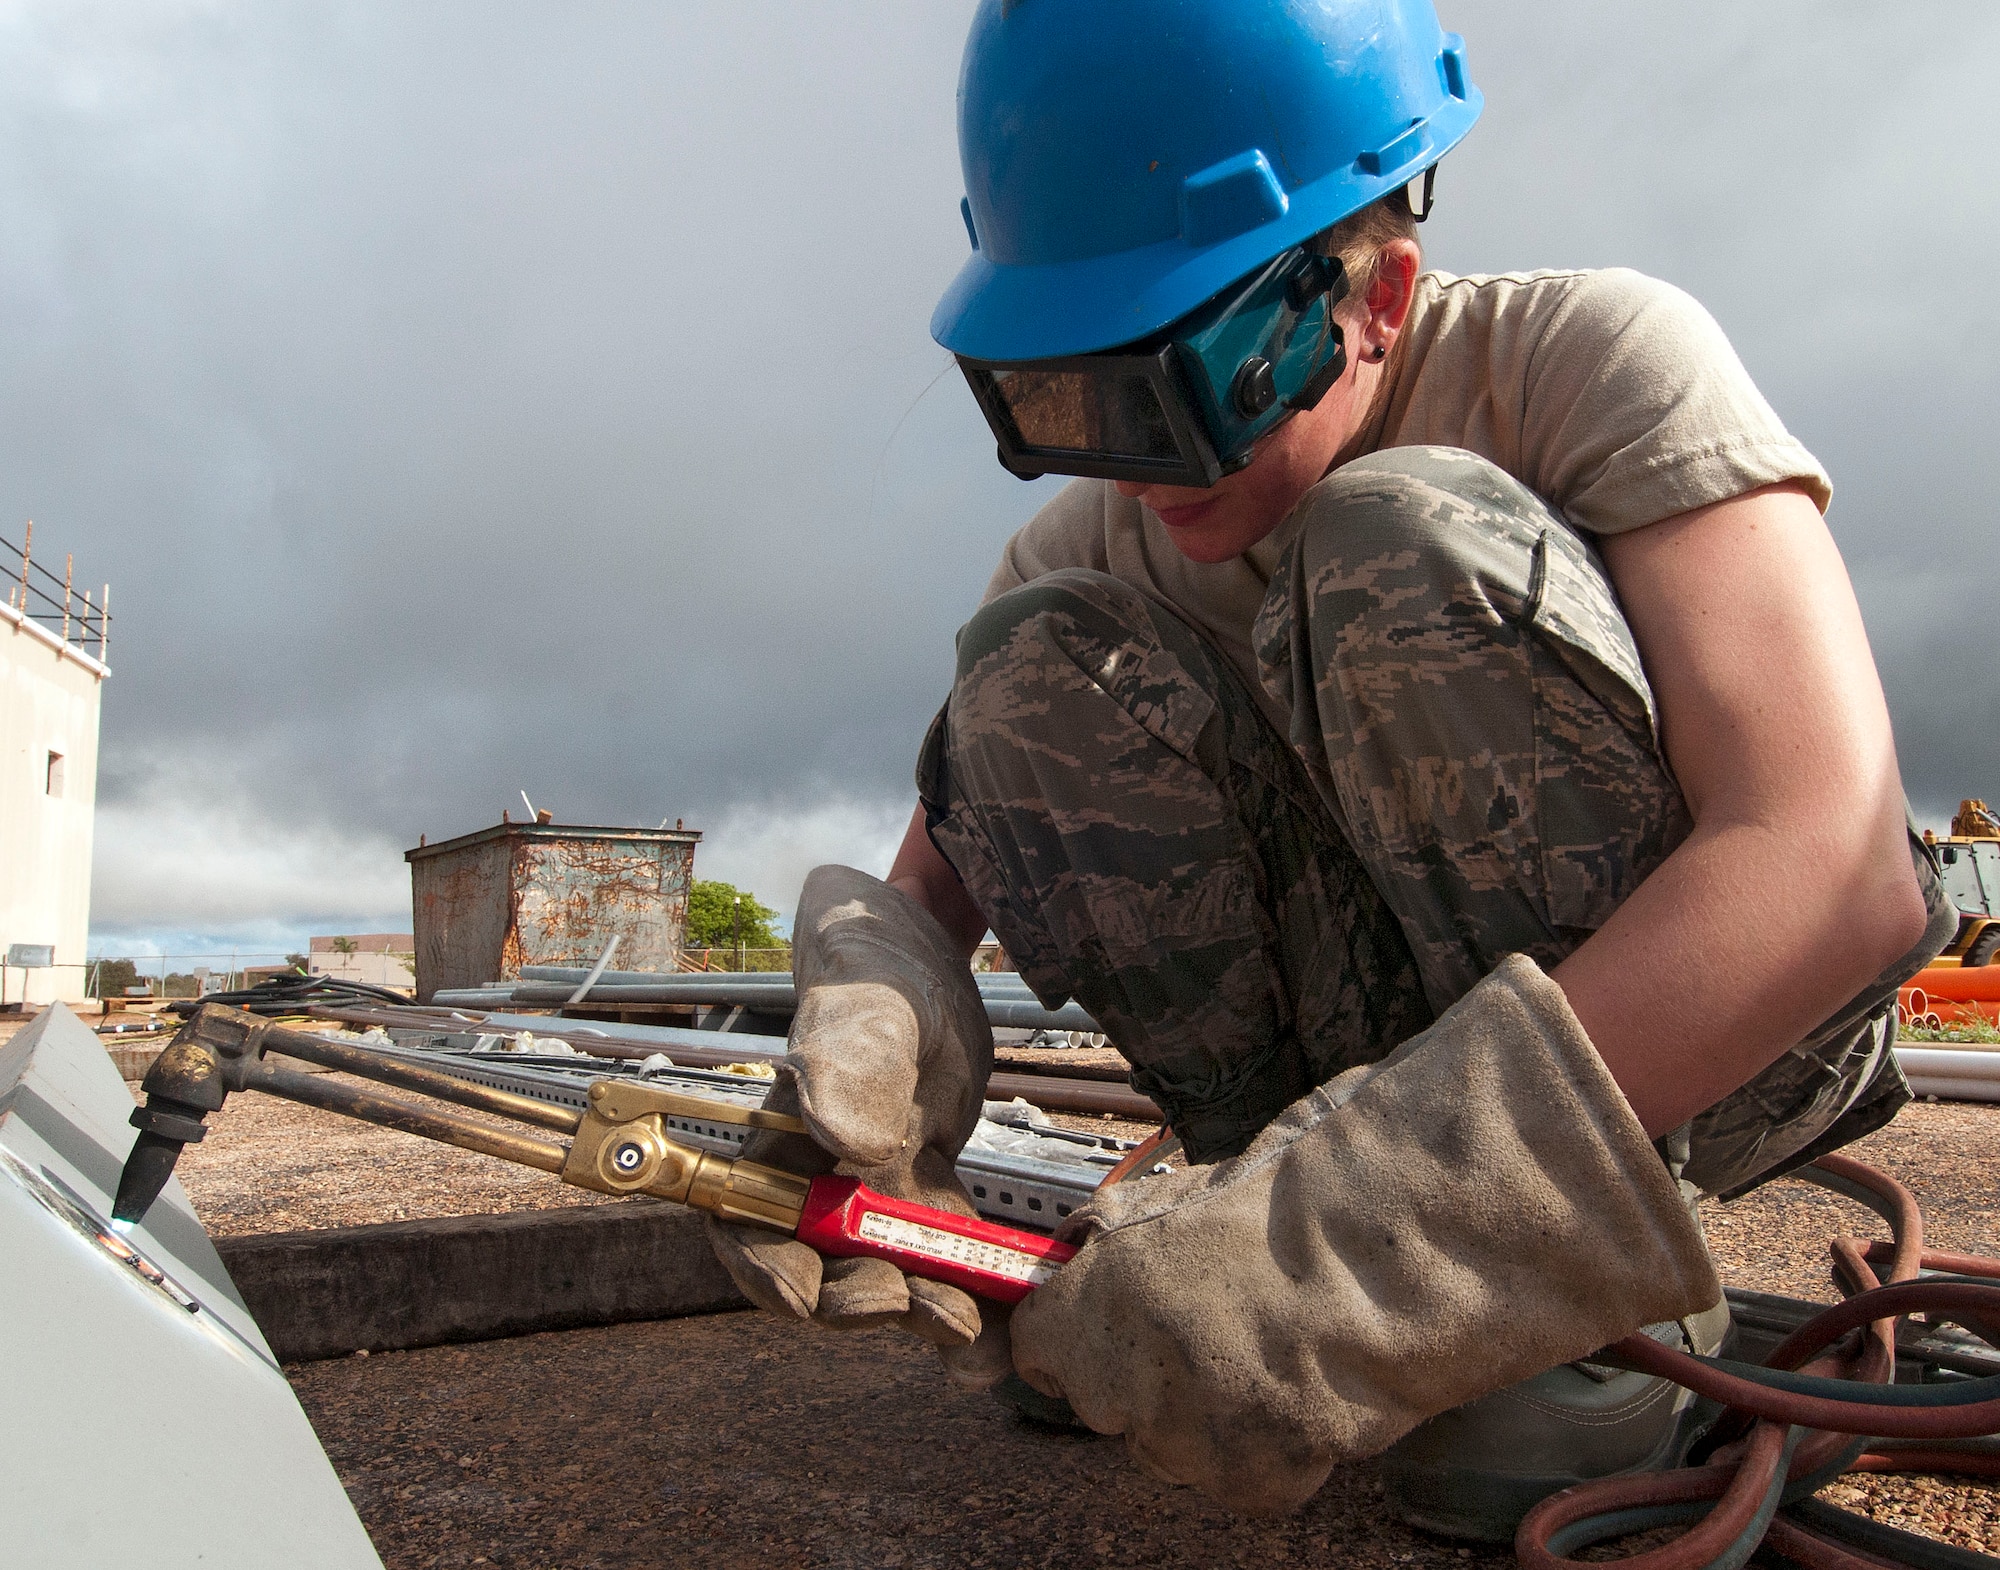 H.E. HOLT NAVAL COMMUNICATION STATION, Australia – Staff Sgt. Kelli Naramore, operations manager for the Alaska Air National Guard’s 176th Civil Engineer Squadron, uses an oxyacetylene torch to cut a hole in a girder here May 6, 2014. Thirty-four Alaska Air Guard members, most from the 176th CES, deployed for two weeks to this tiny outpost at the far western tip of Australia to help build a space radar facility to be jointly operated by Australia and the United States. U.S. Air National Guard photo by Capt. John Callahan/ Released.